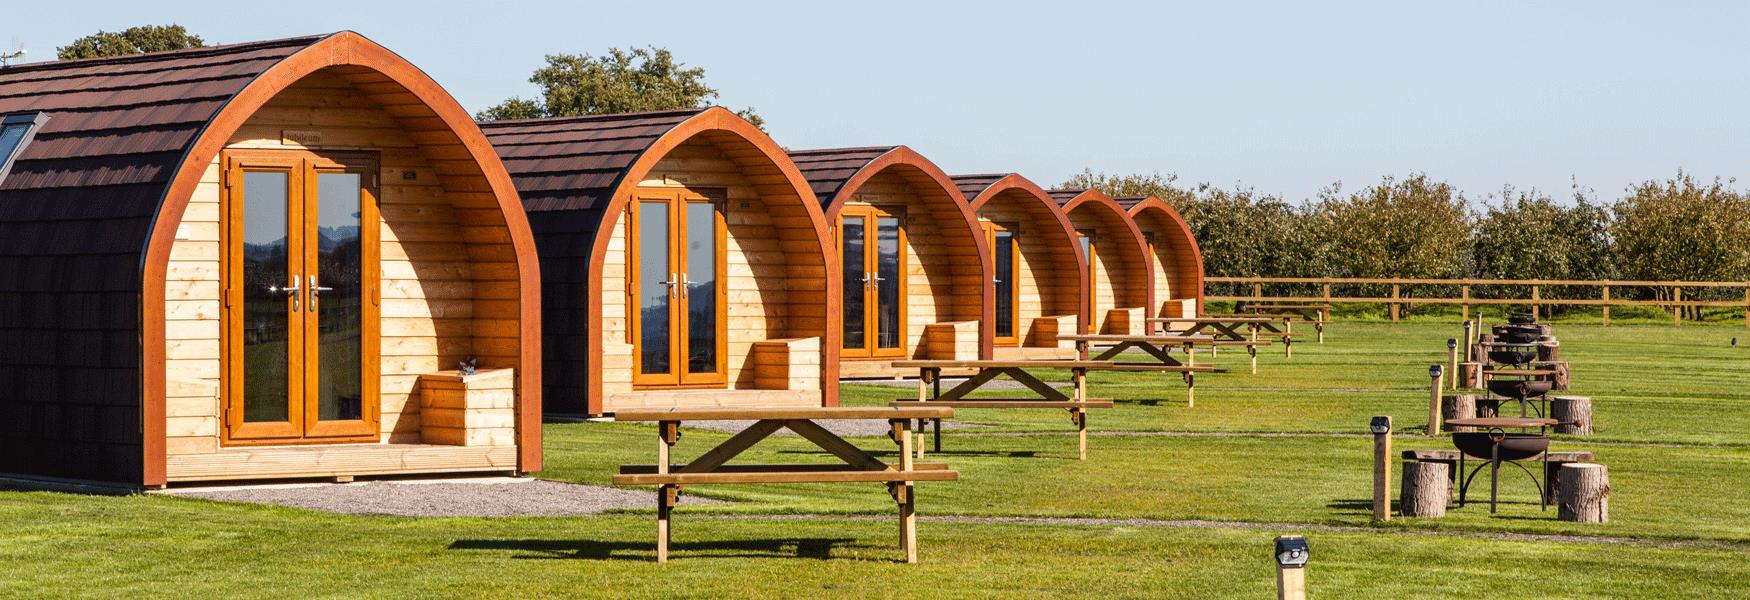 Rankin's Farm Glamping Pod, near Linton, Maidstone Kent.  All private facilities.  Beautiful location.  Pubs close by.  Each pod has fire pit and benches.